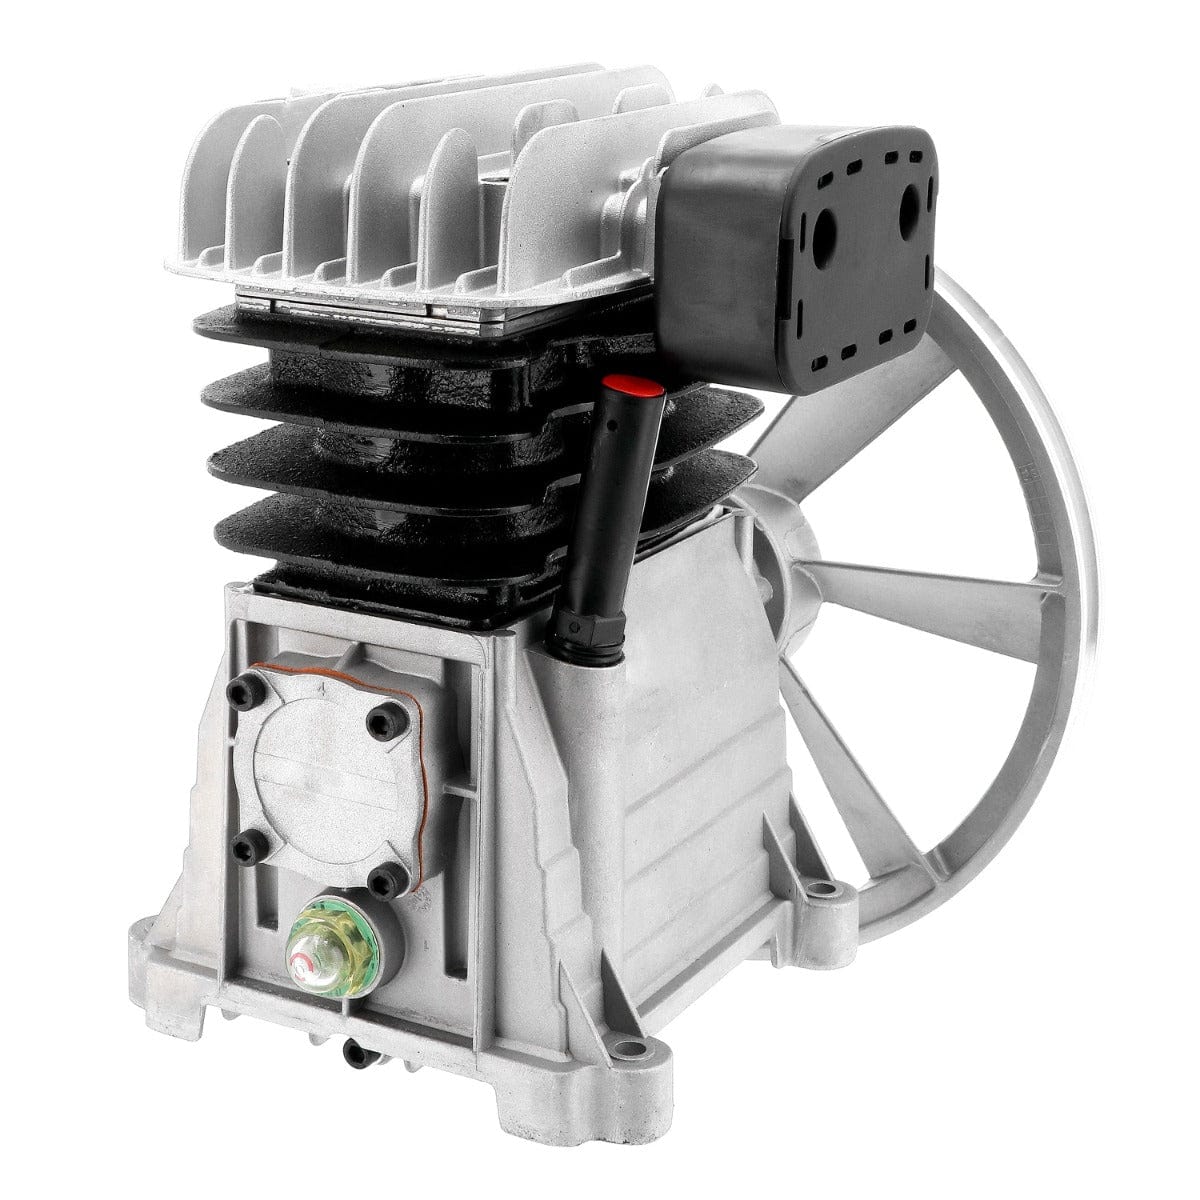 Shamal Air Compressor Pump Unit B2800 - Genuine Replacement for Shamal Compressors in Accra, Ghana | Supply Master Compressor & Air Tool Accessories Buy Tools hardware Building materials